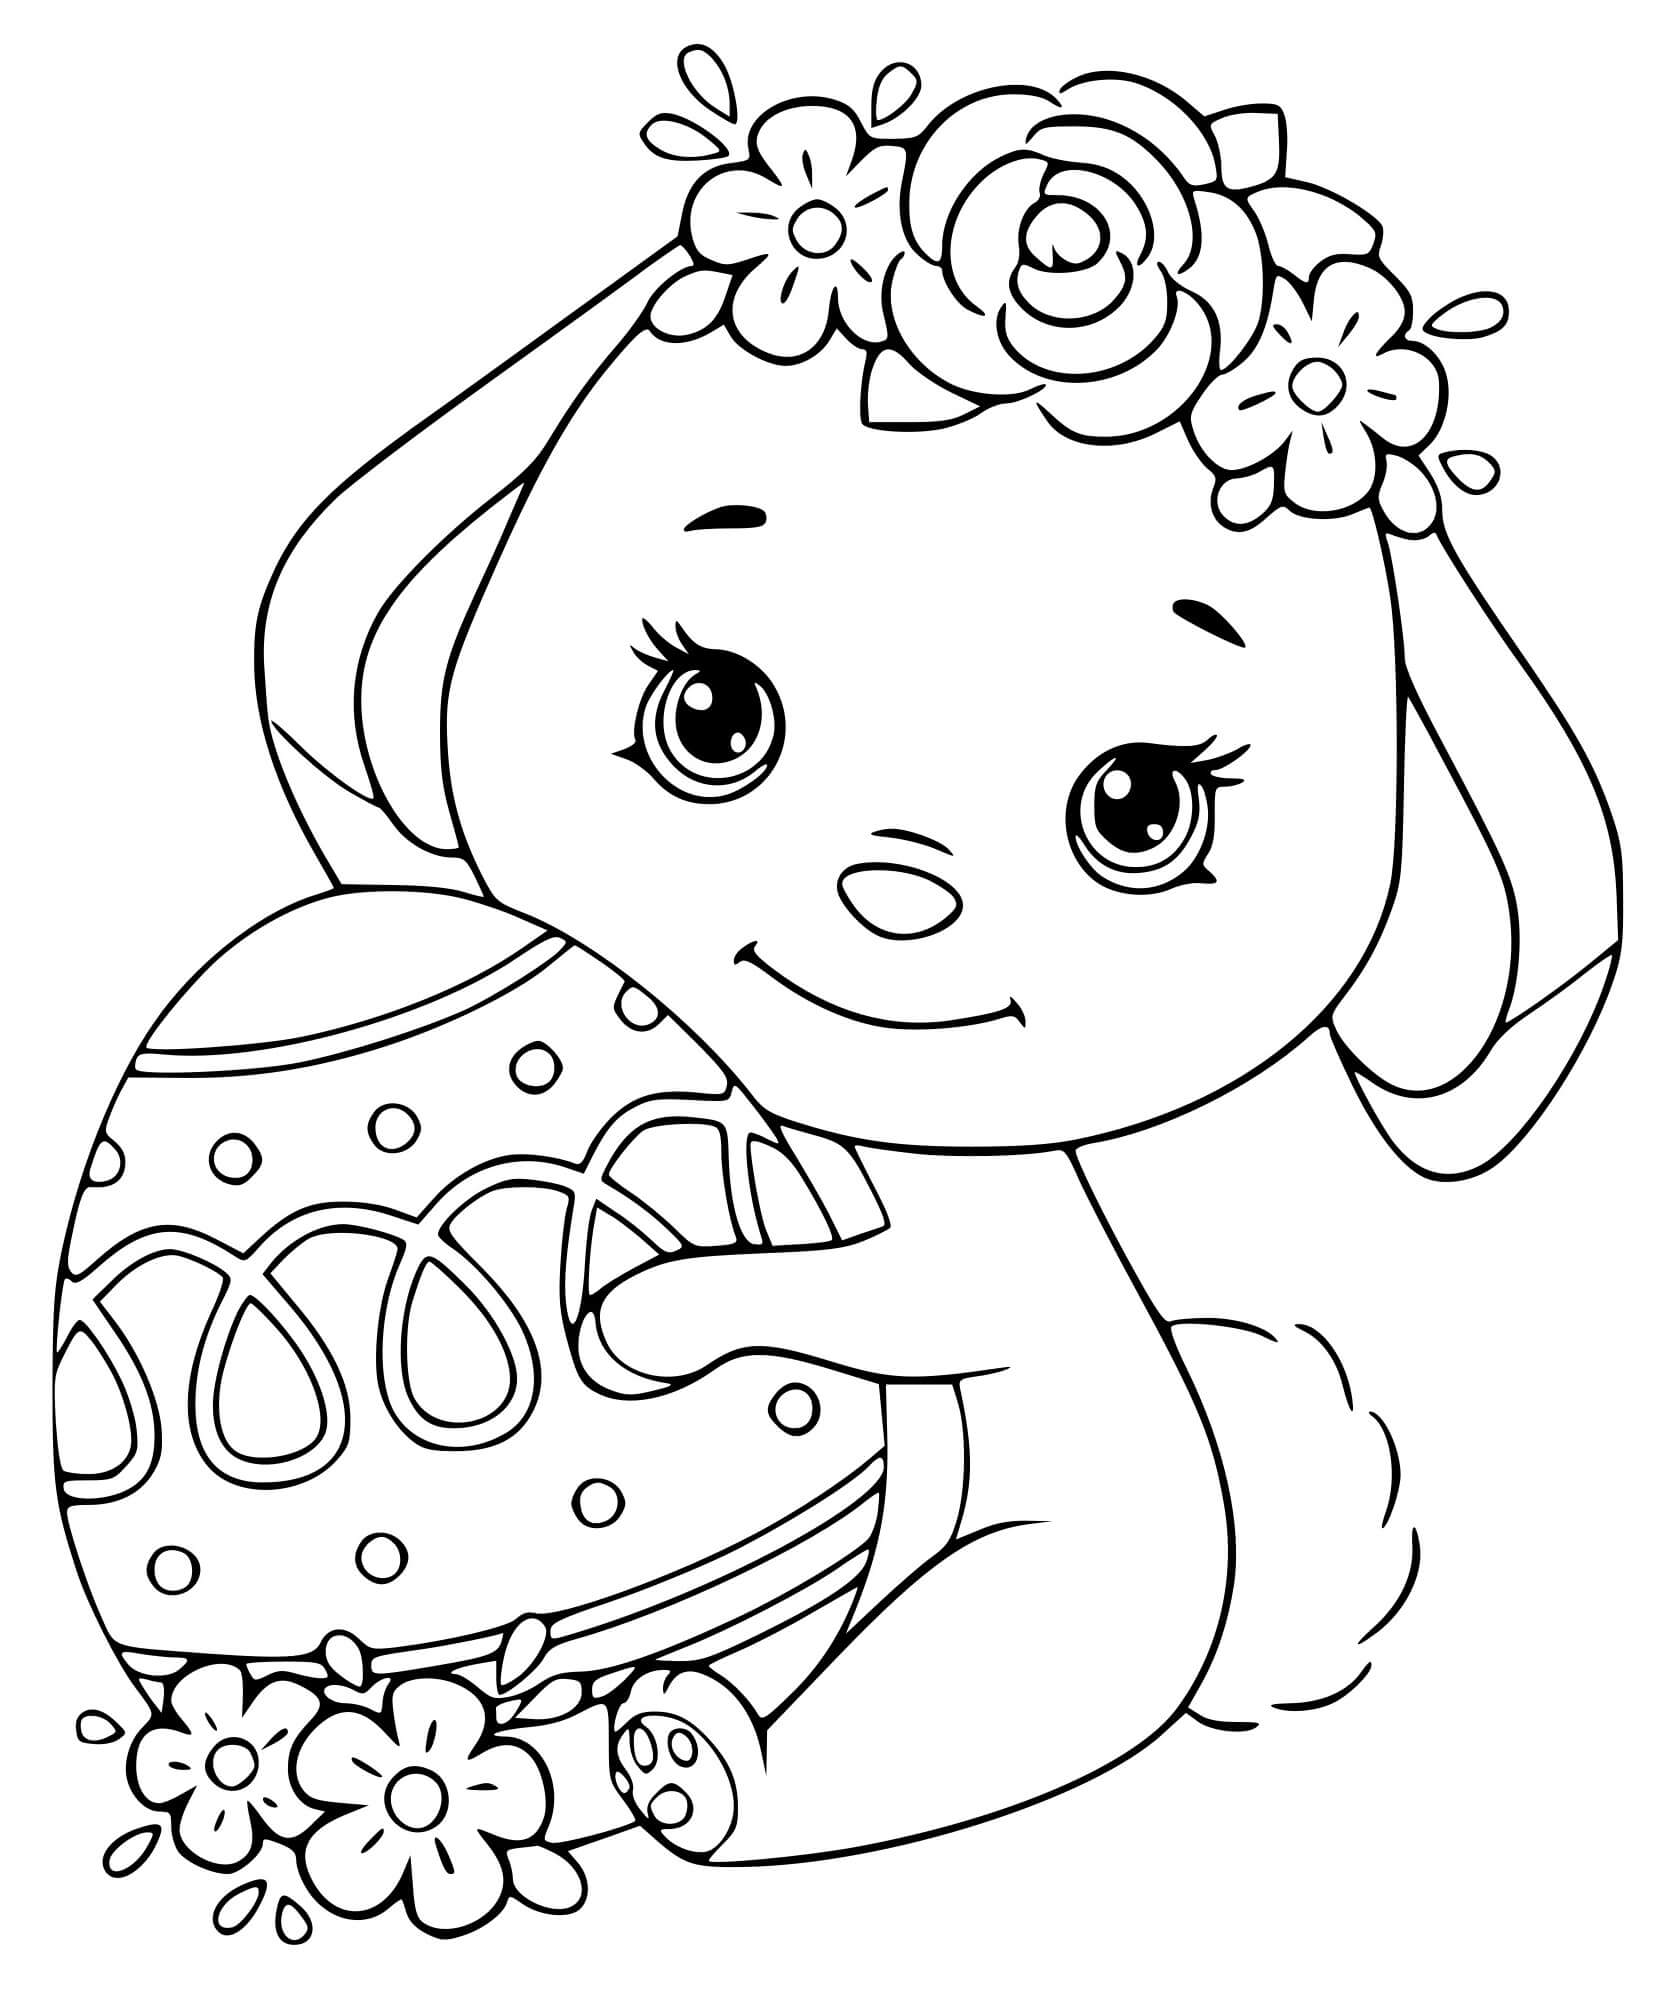 Cute Easter Bunny With Egg Coloring Pages   Coloring Cool